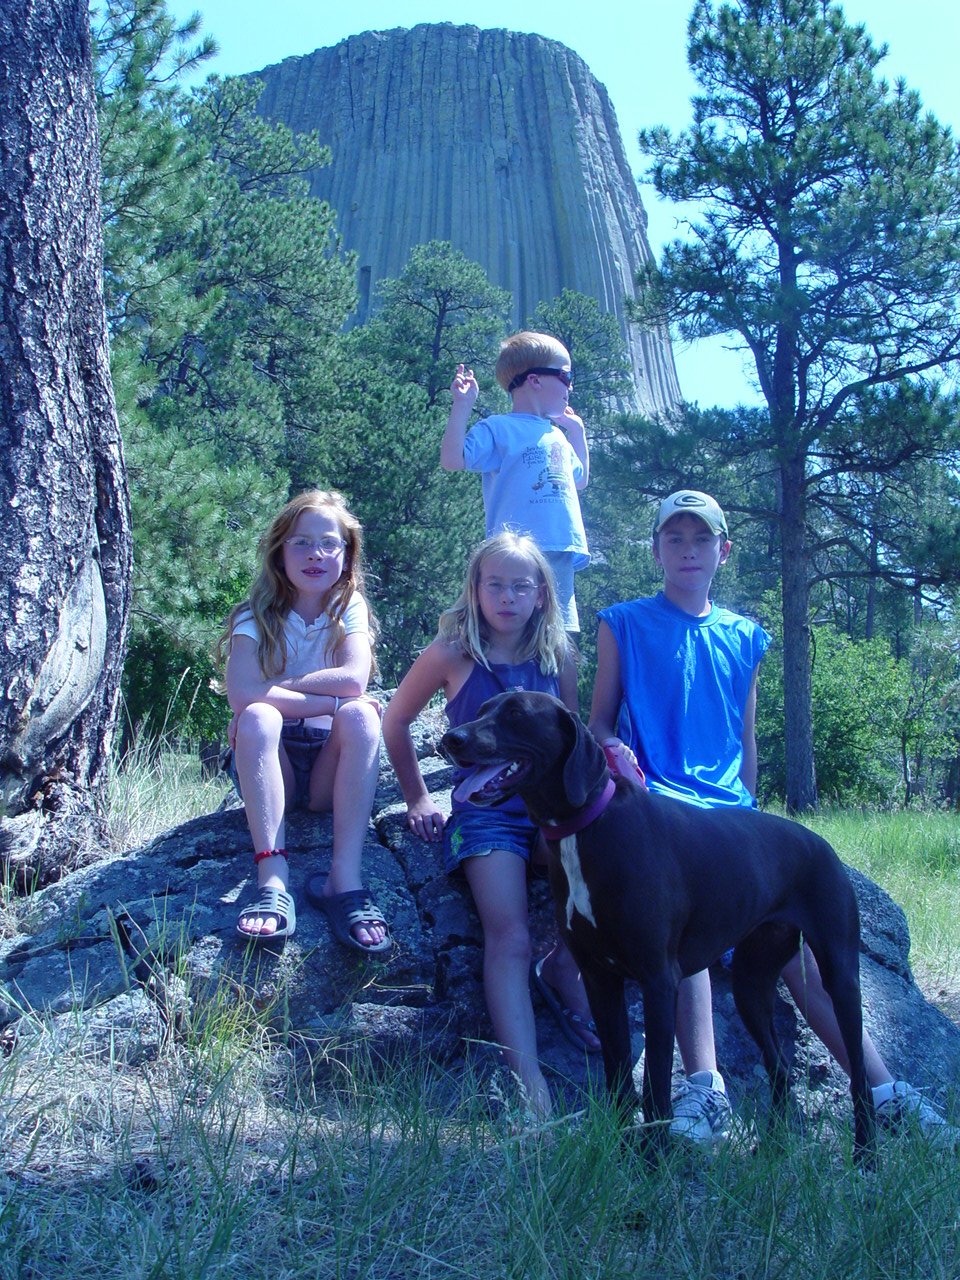 The demons at the Devils Tower...